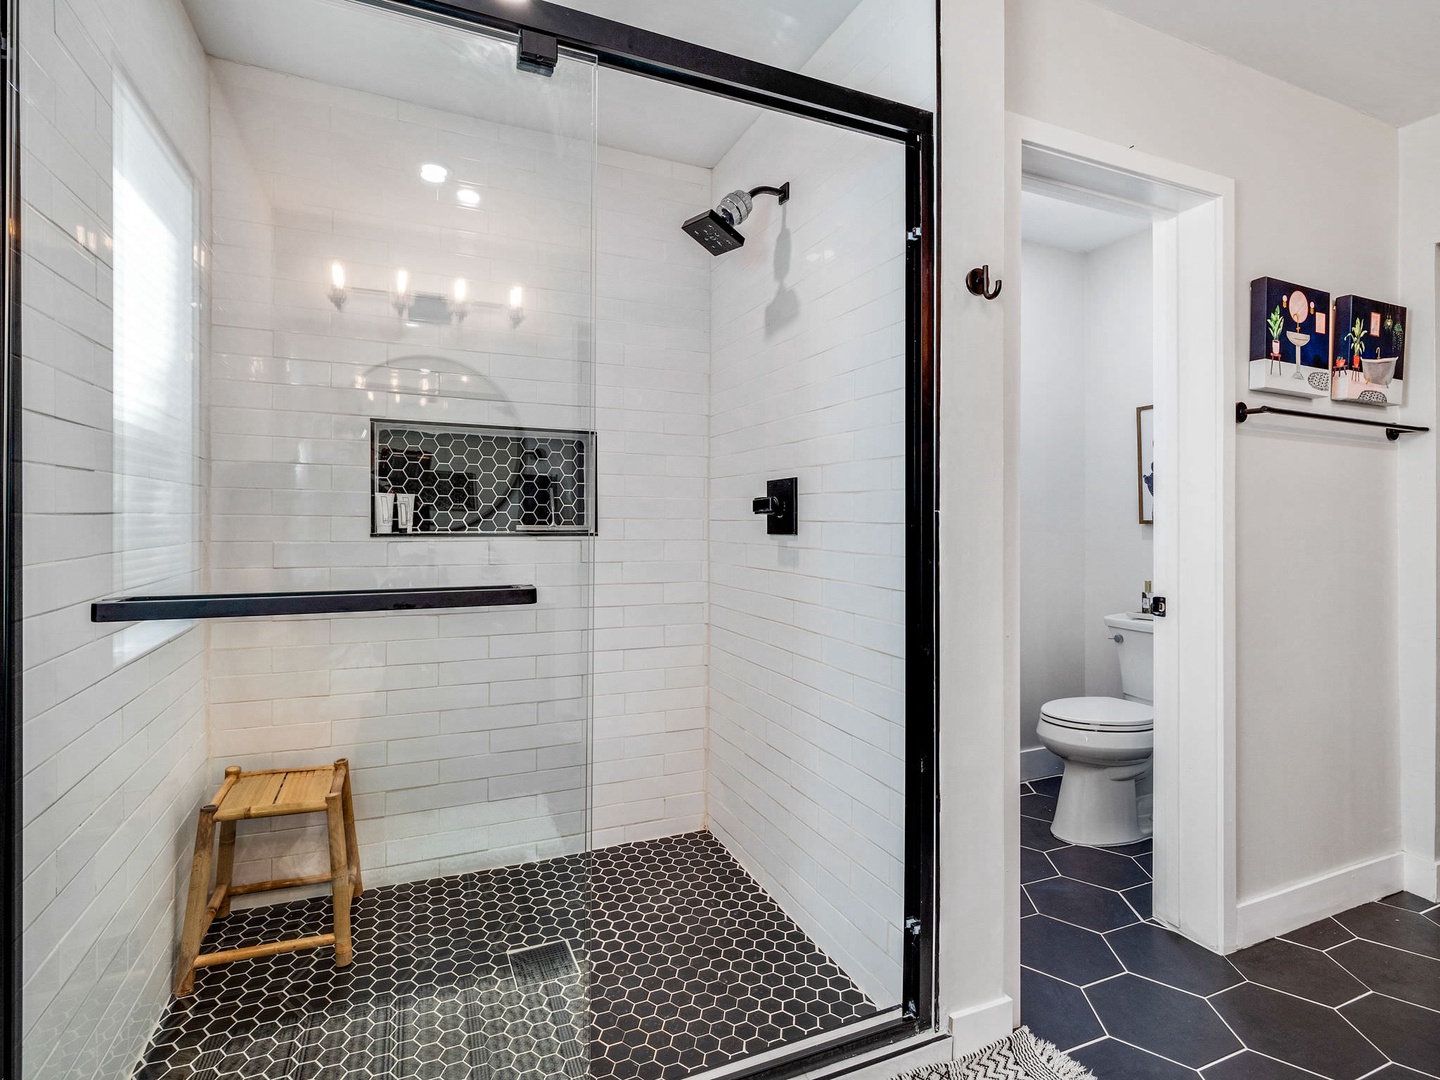 Primary Glass Enclosed Shower